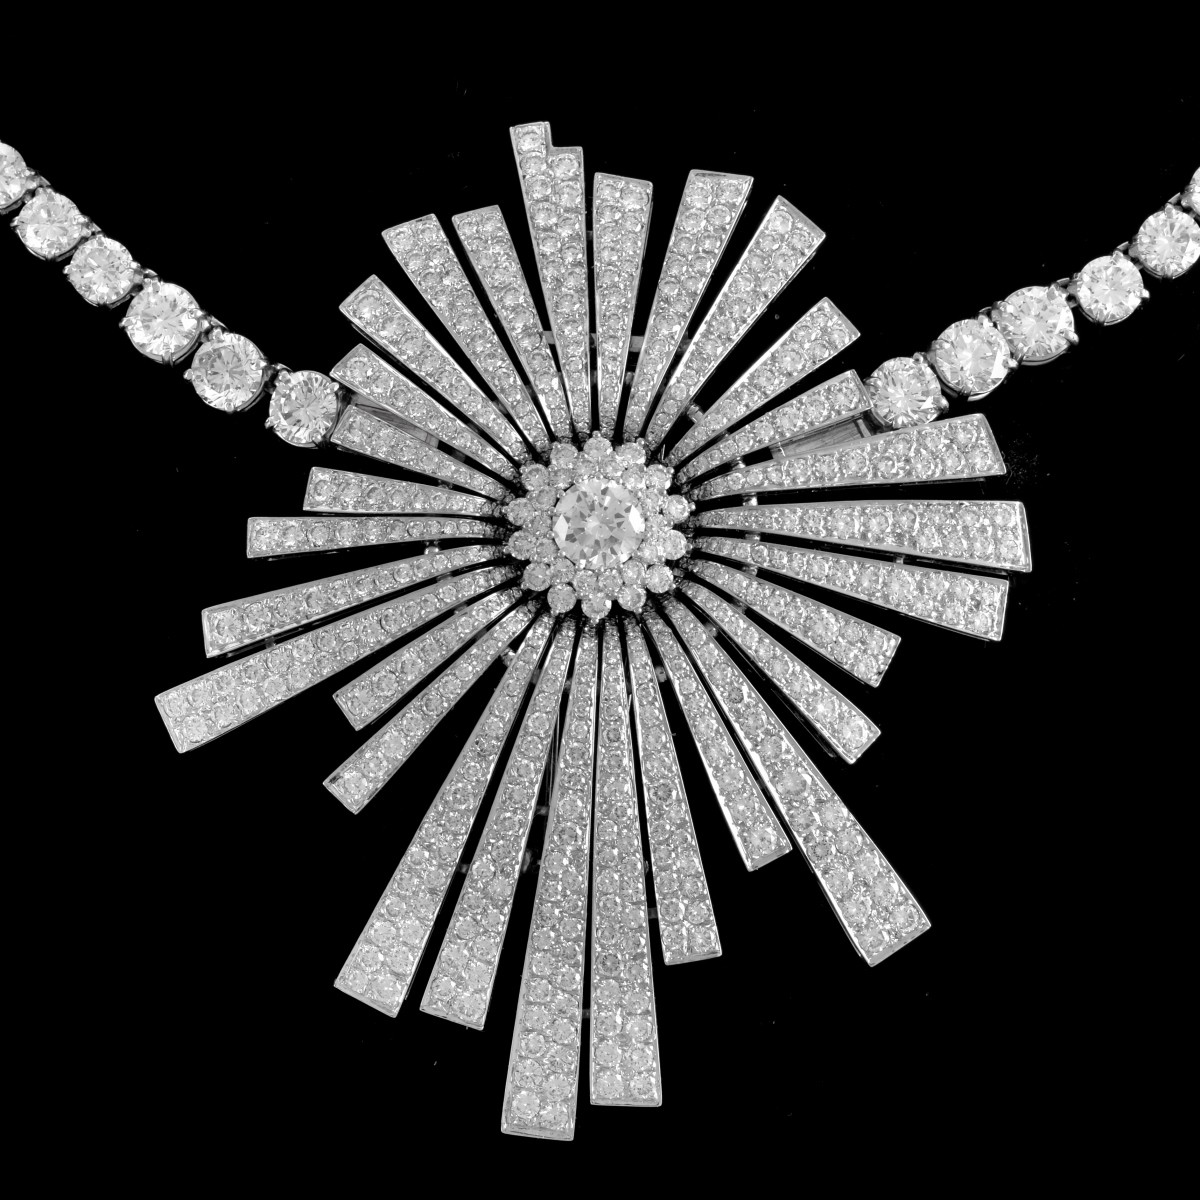 AGI 42.41ct TW Diamond and 18K Necklace/Brooch - Image 2 of 8